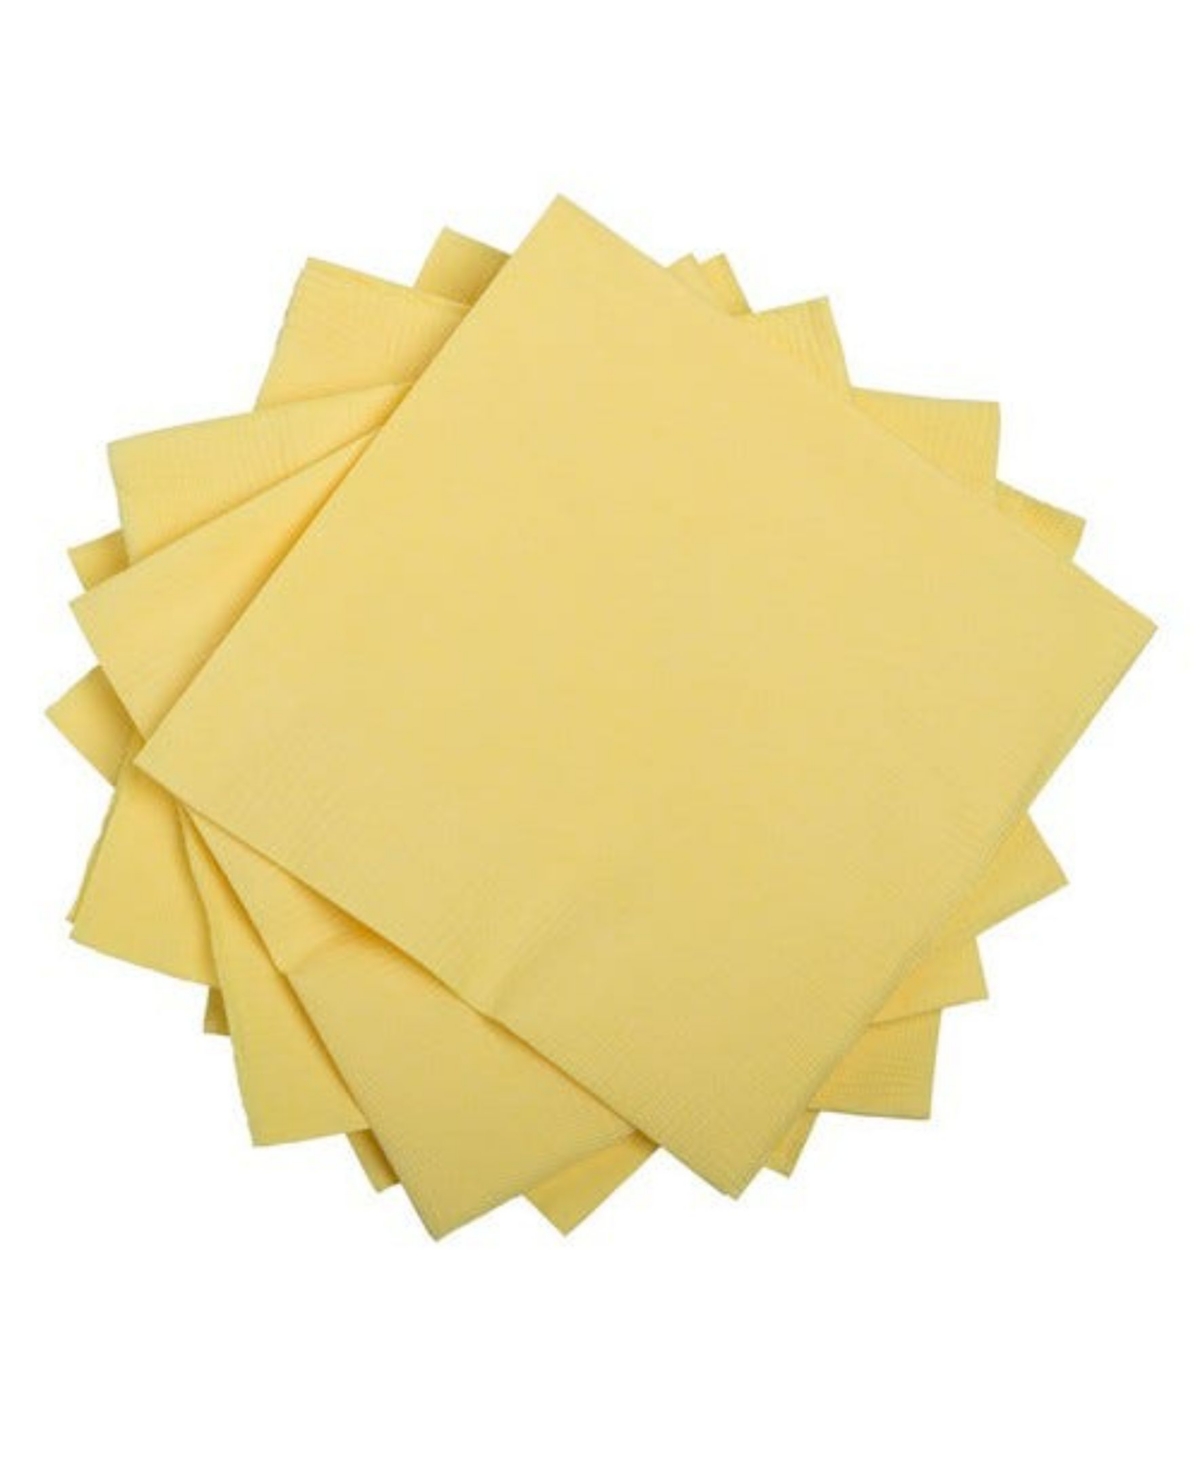 Jam Paper Small Beverage Napkins In Light Yellow